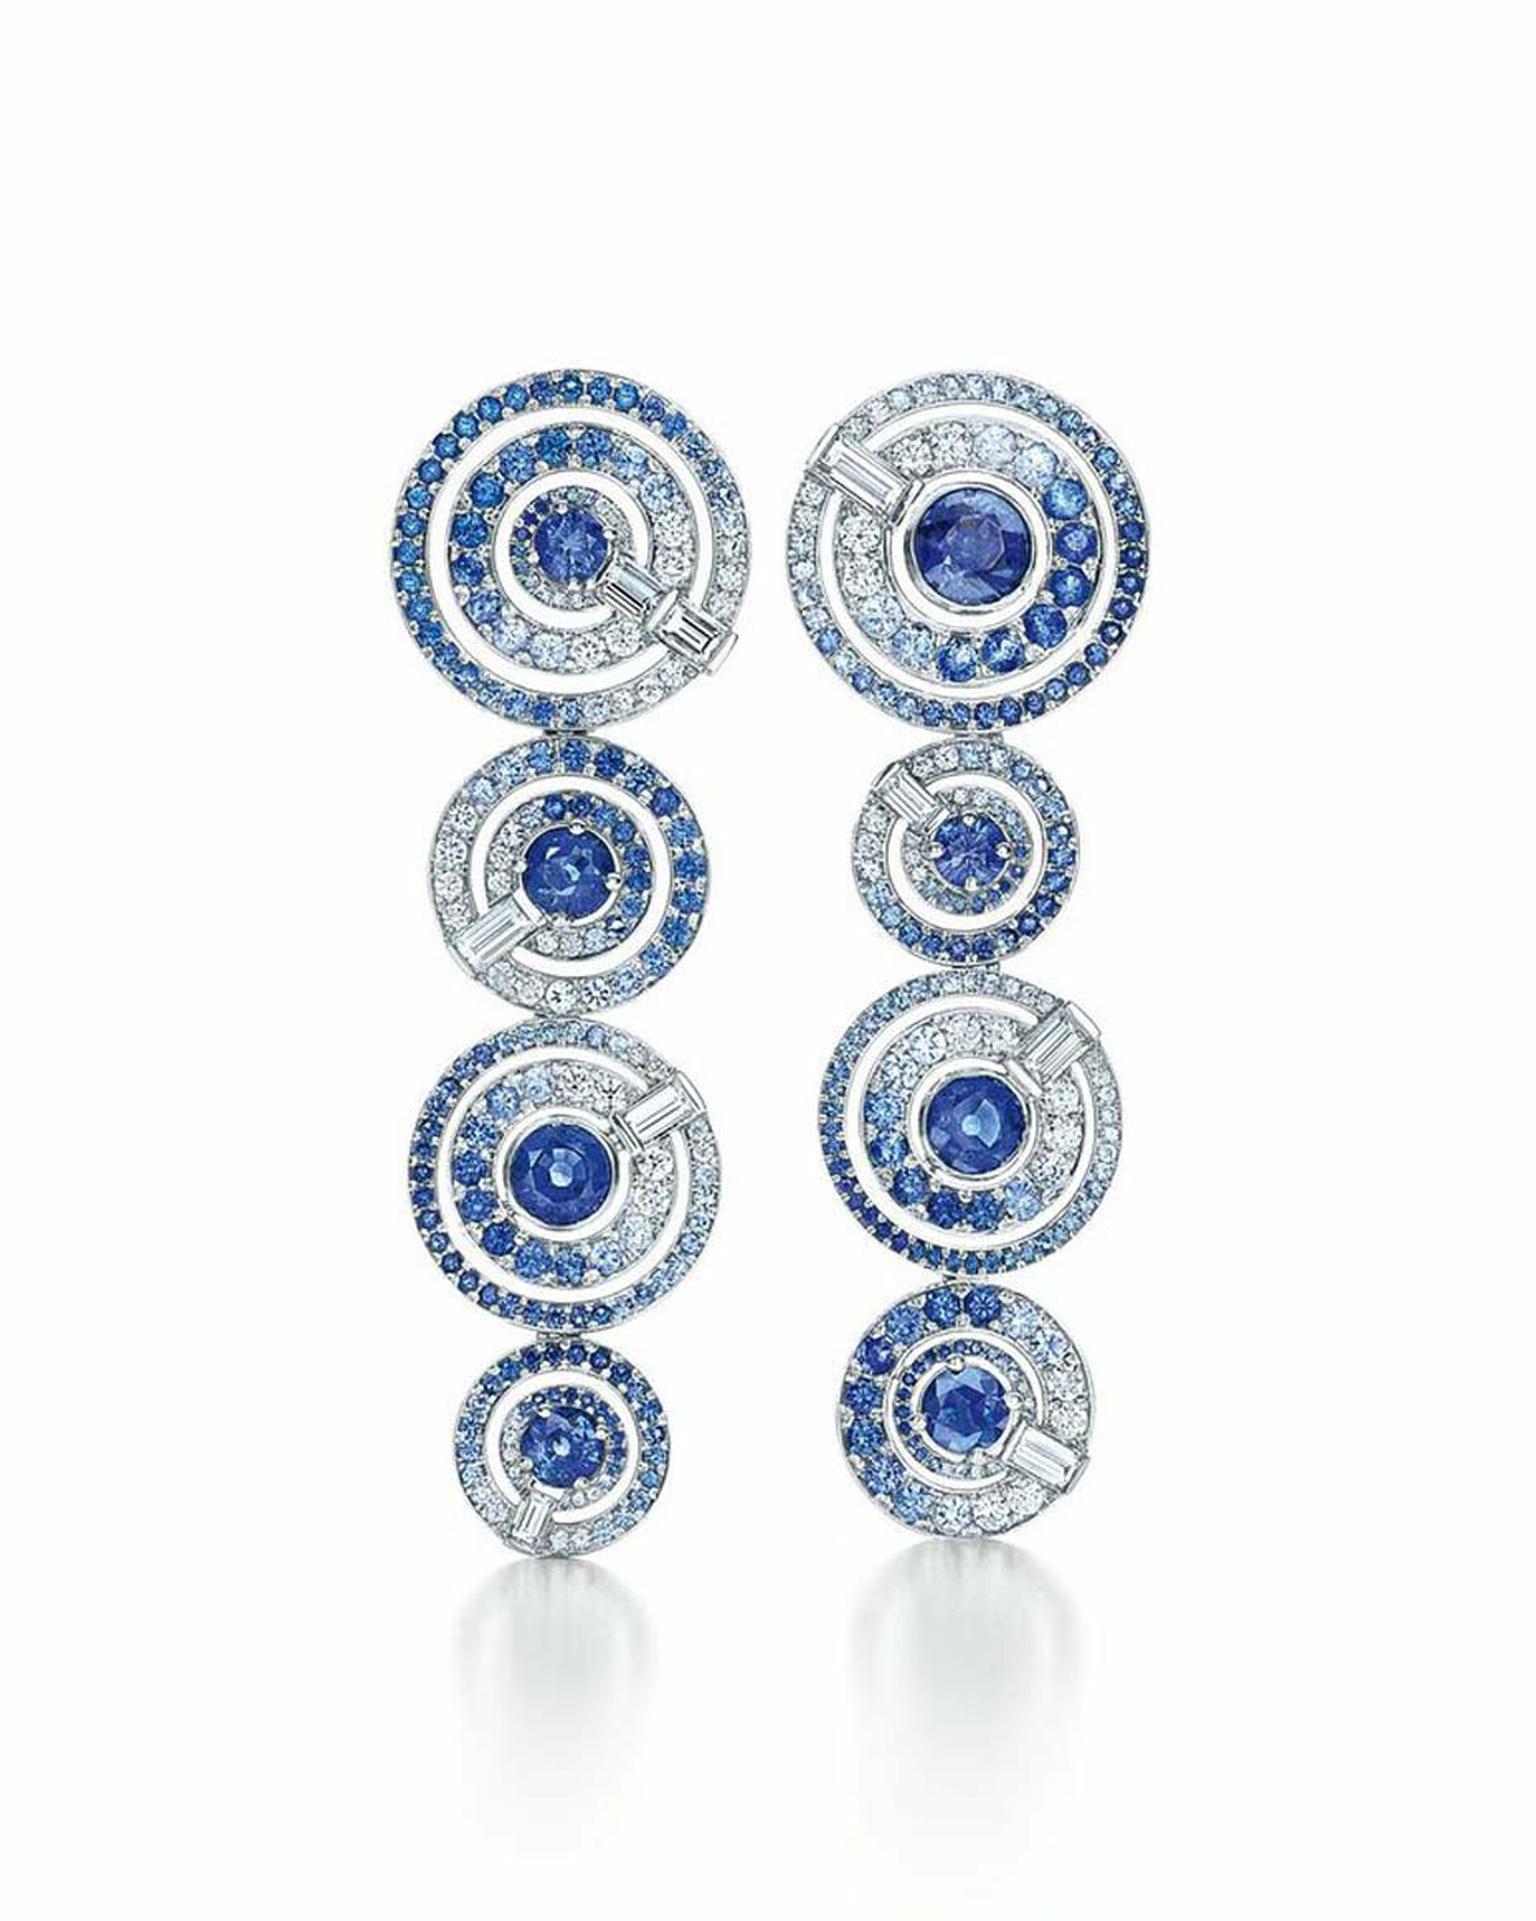 Tiffany earrings with sapphires and round diamonds in white gold from the 2015 Blue Book collection.